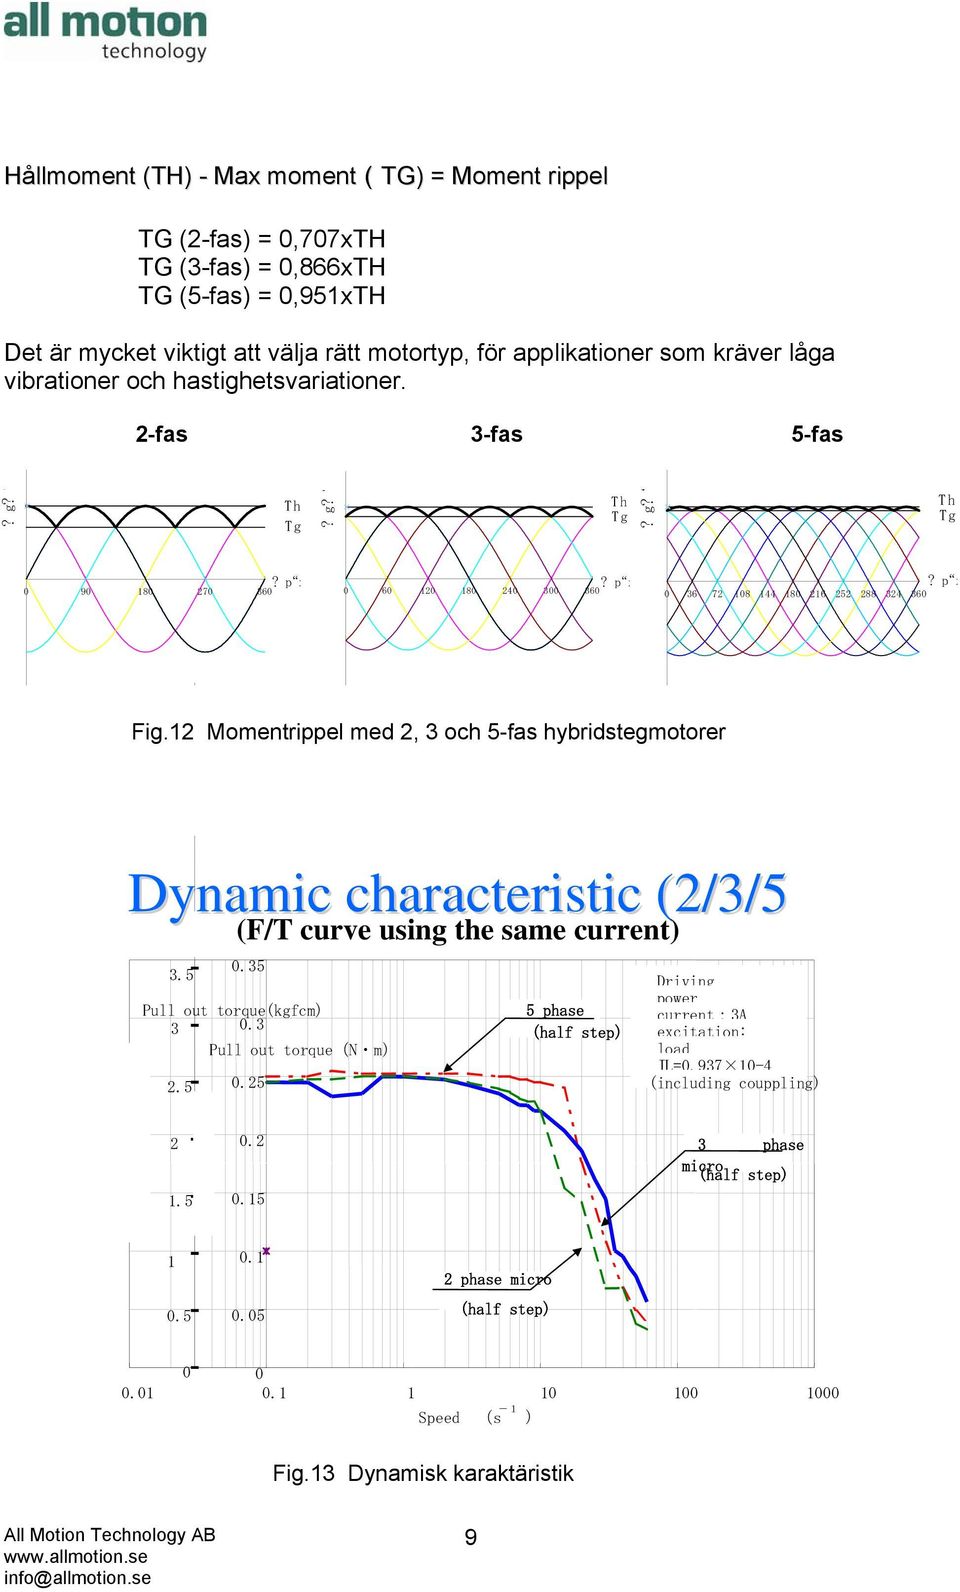 12 Momentrippel med 2, 3 och 5-fas hybridstegmotorer Dynamic characteristic (2/3/5 (F/T curve using the same current) 3.5 Pull out torque(kgfcm) 3 0.3 Pull out torque(n m) 2.5 0.35 0.